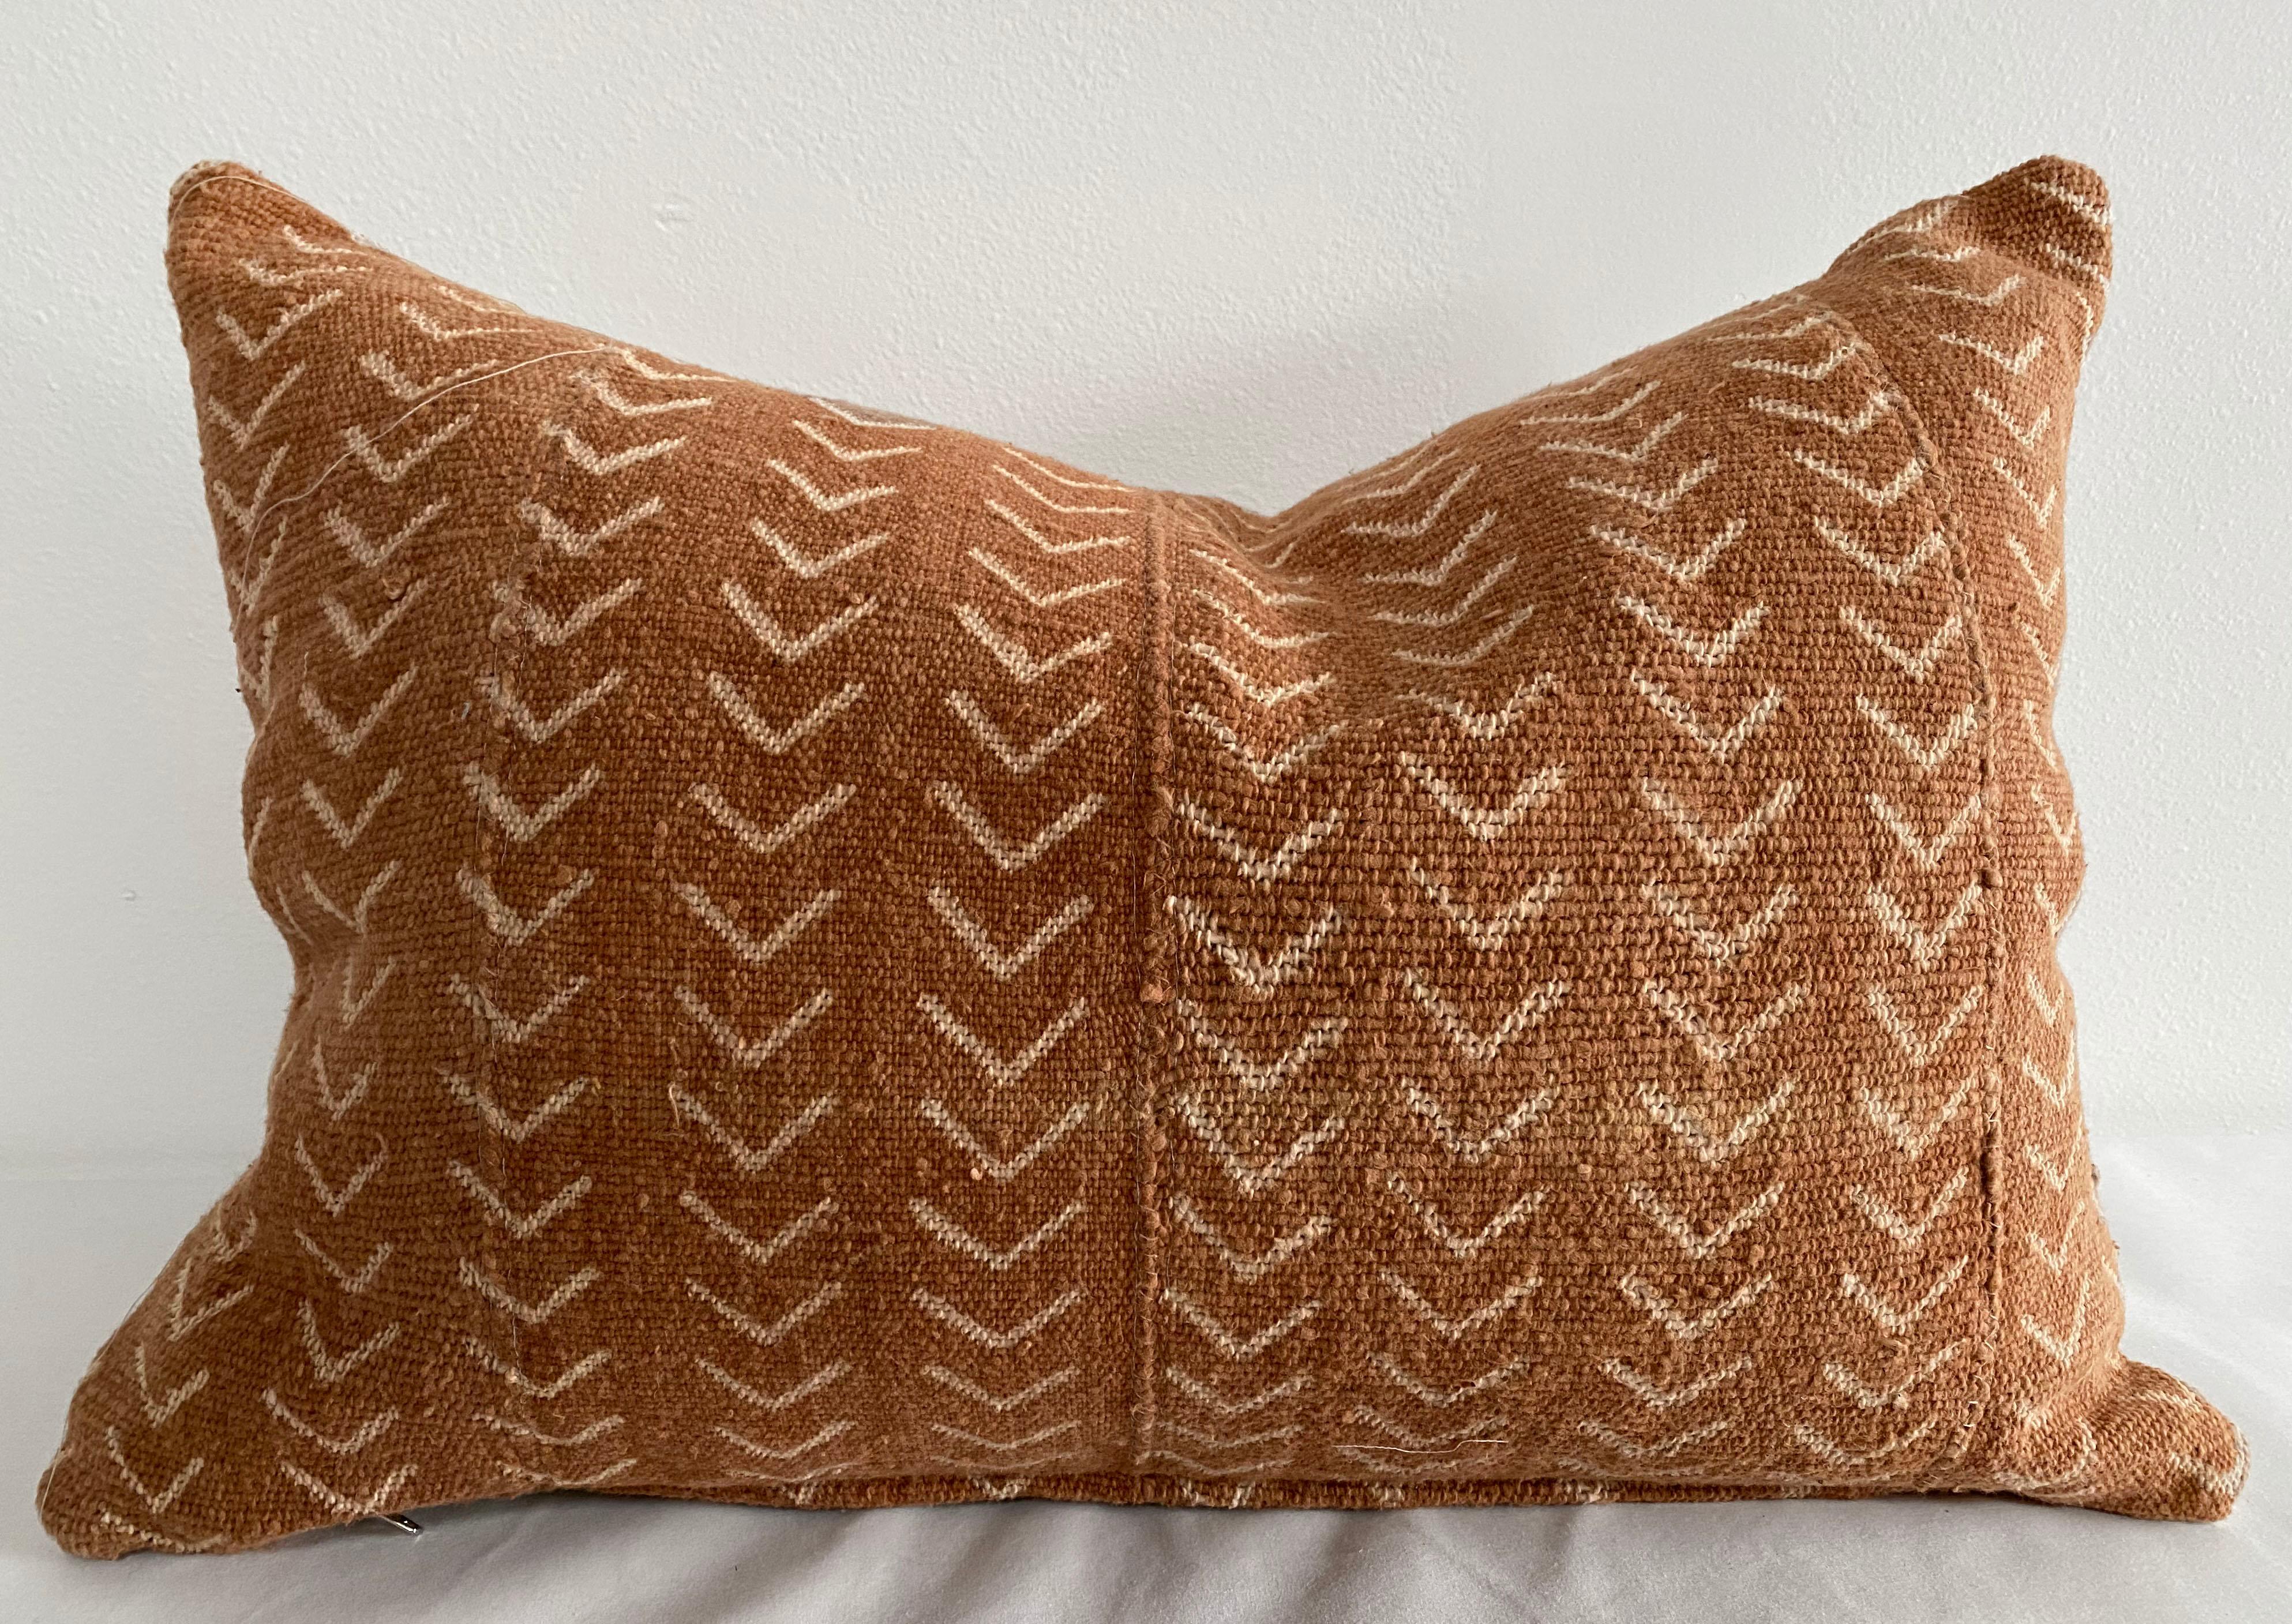 Vintage African Mudcloth pillows in a deep burnt orange rust color, with off white arrow pattern. Sewn with a zipper closure, and natural linen backing. The inside has an overlocked edge, can be machine washed on gentle. For color fading dry clean